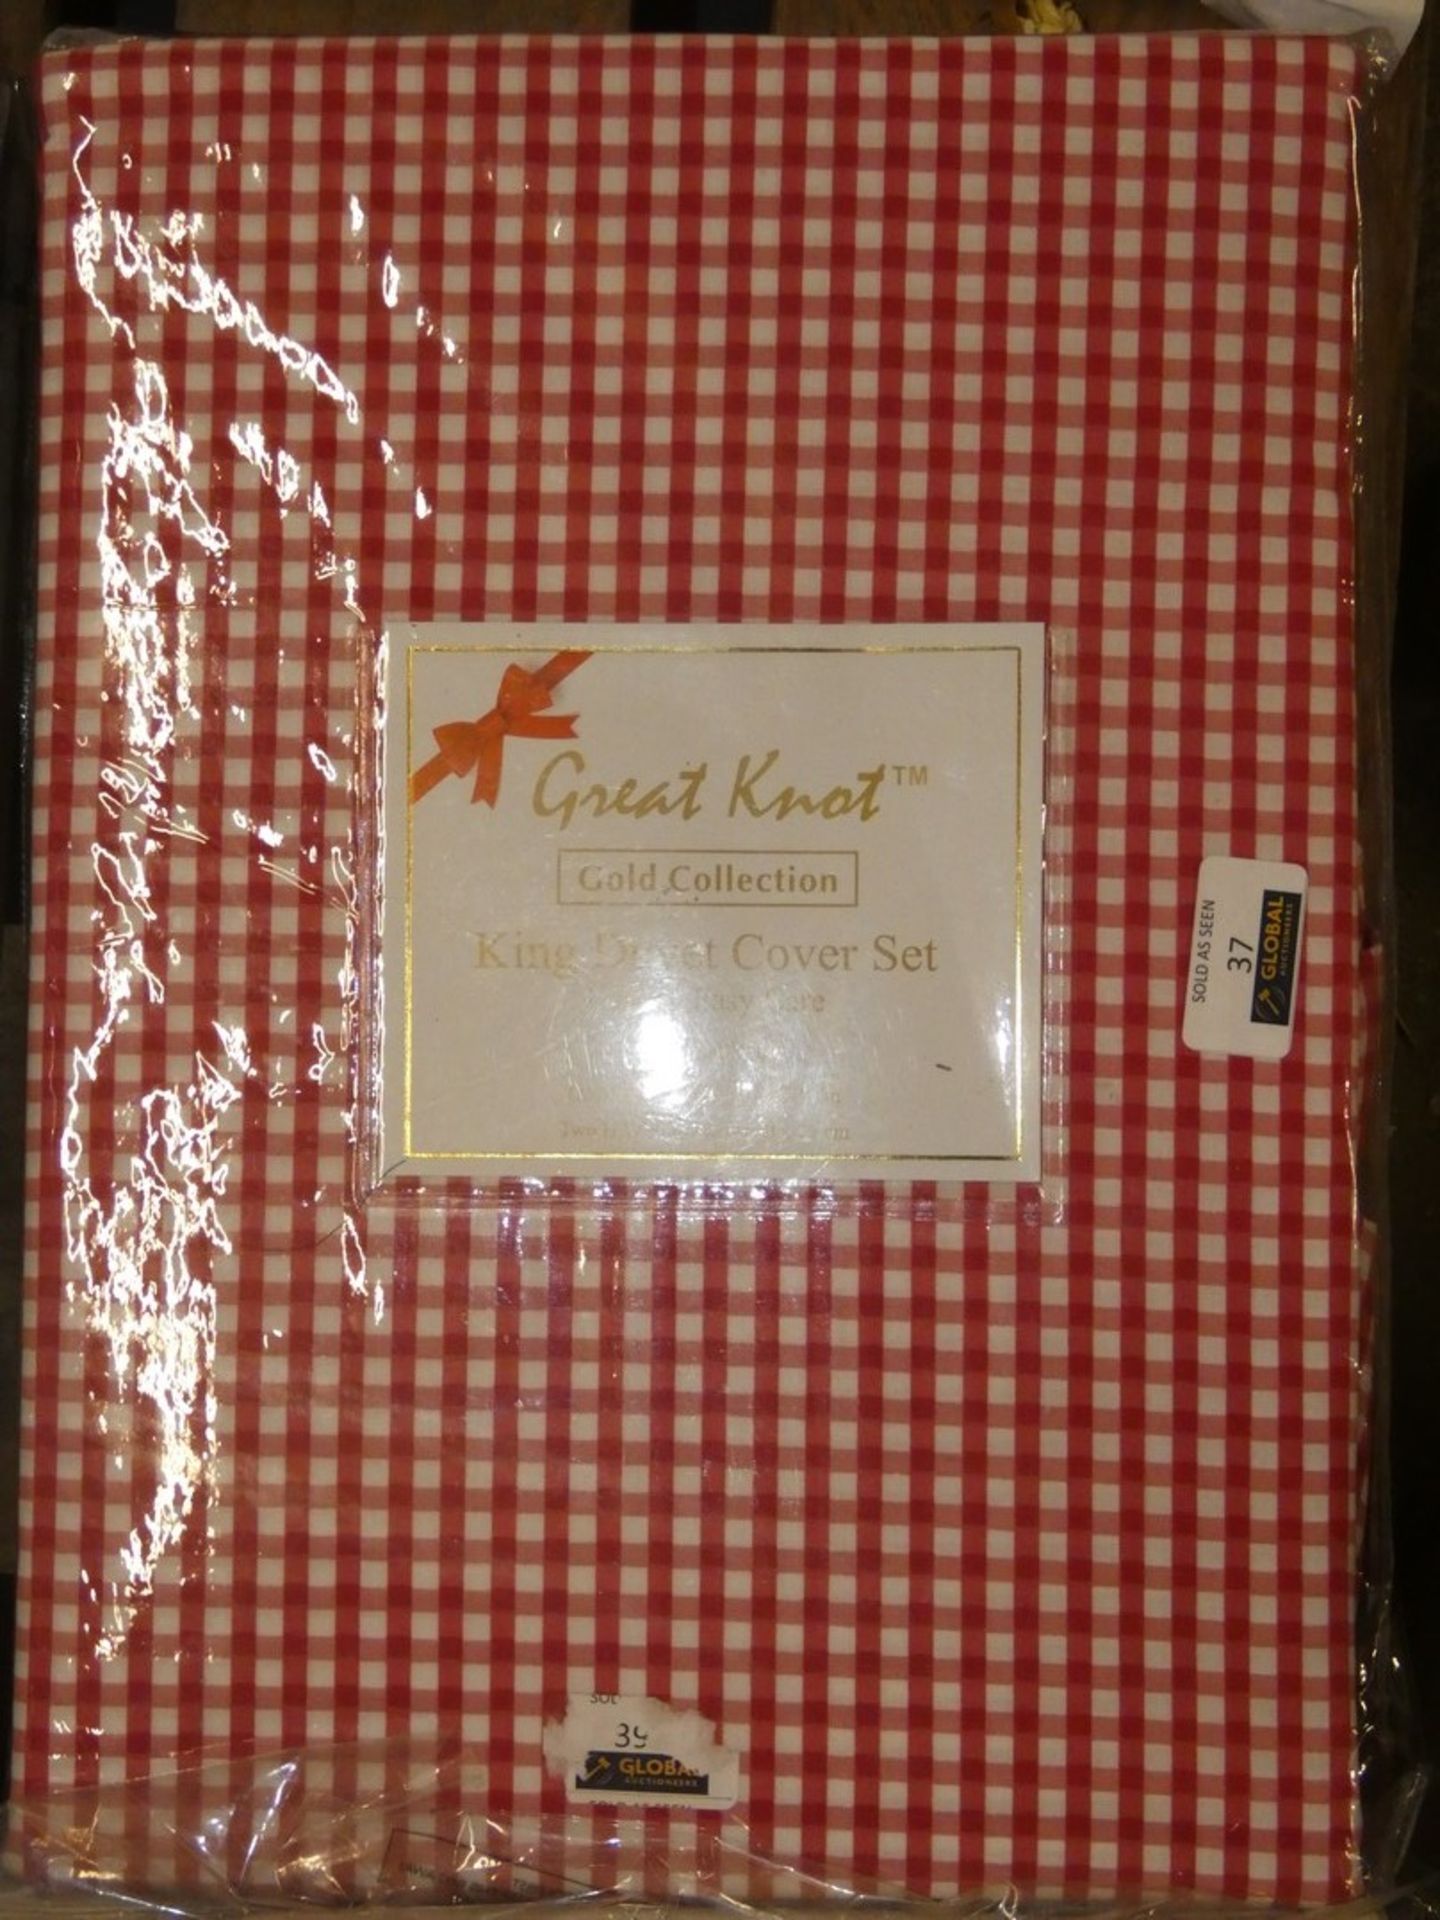 Bagged Great Knot Red And White Check polycotton Luxury Duvet Cover Set RRP£50.0 (Viewing/Appraisals